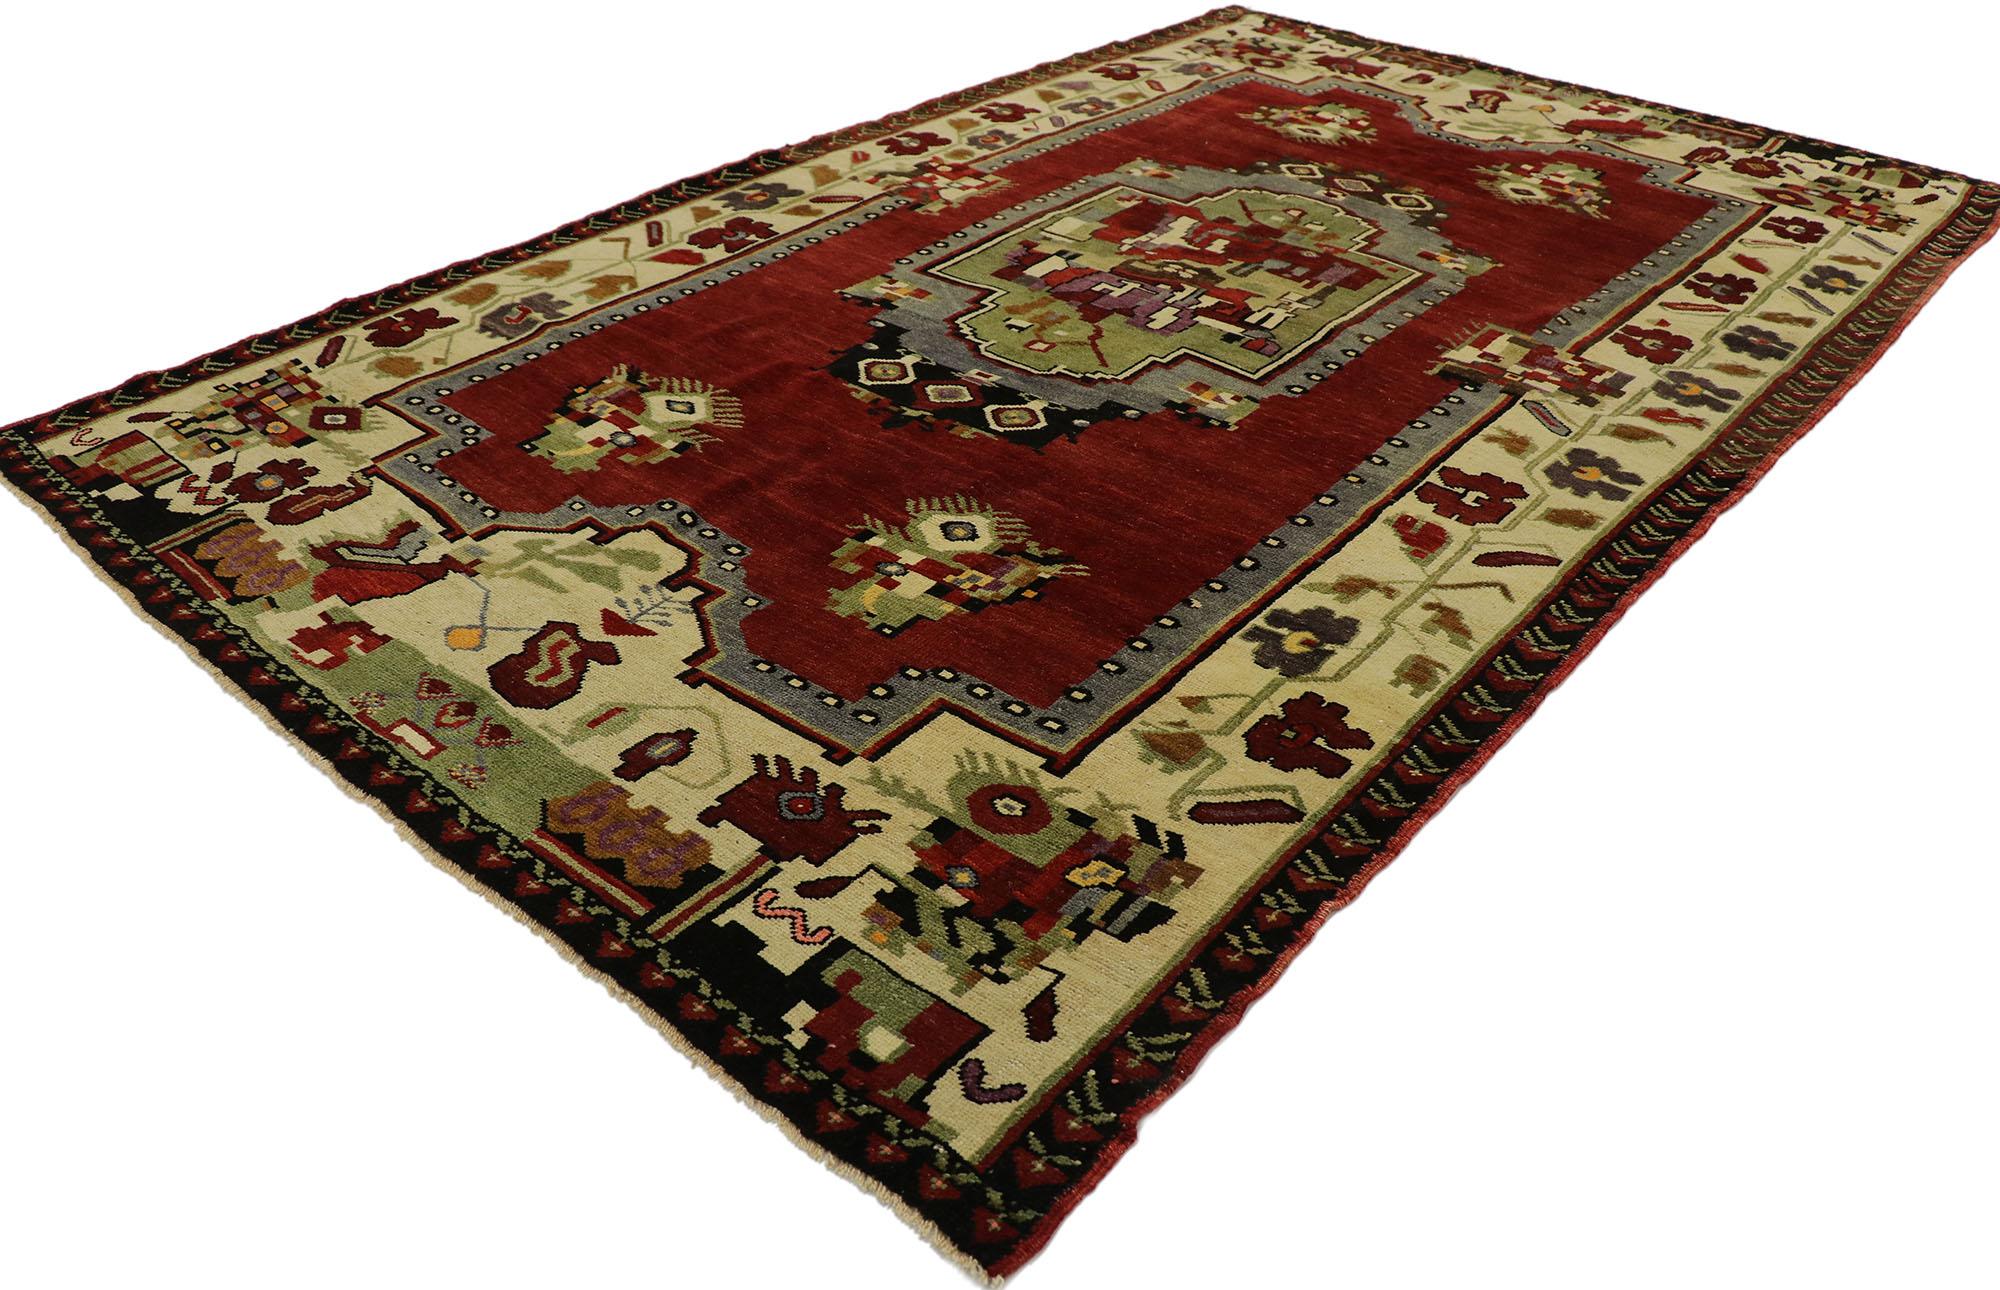 53180 vintage Turkish Oushak rug with Medieval English Tudor style. Rich in detail with a traditional feel, this hand knotted wool vintage Turkish Oushak rug beautifully embodies a Medieval English Tudor style. The abrashed dark red field features a